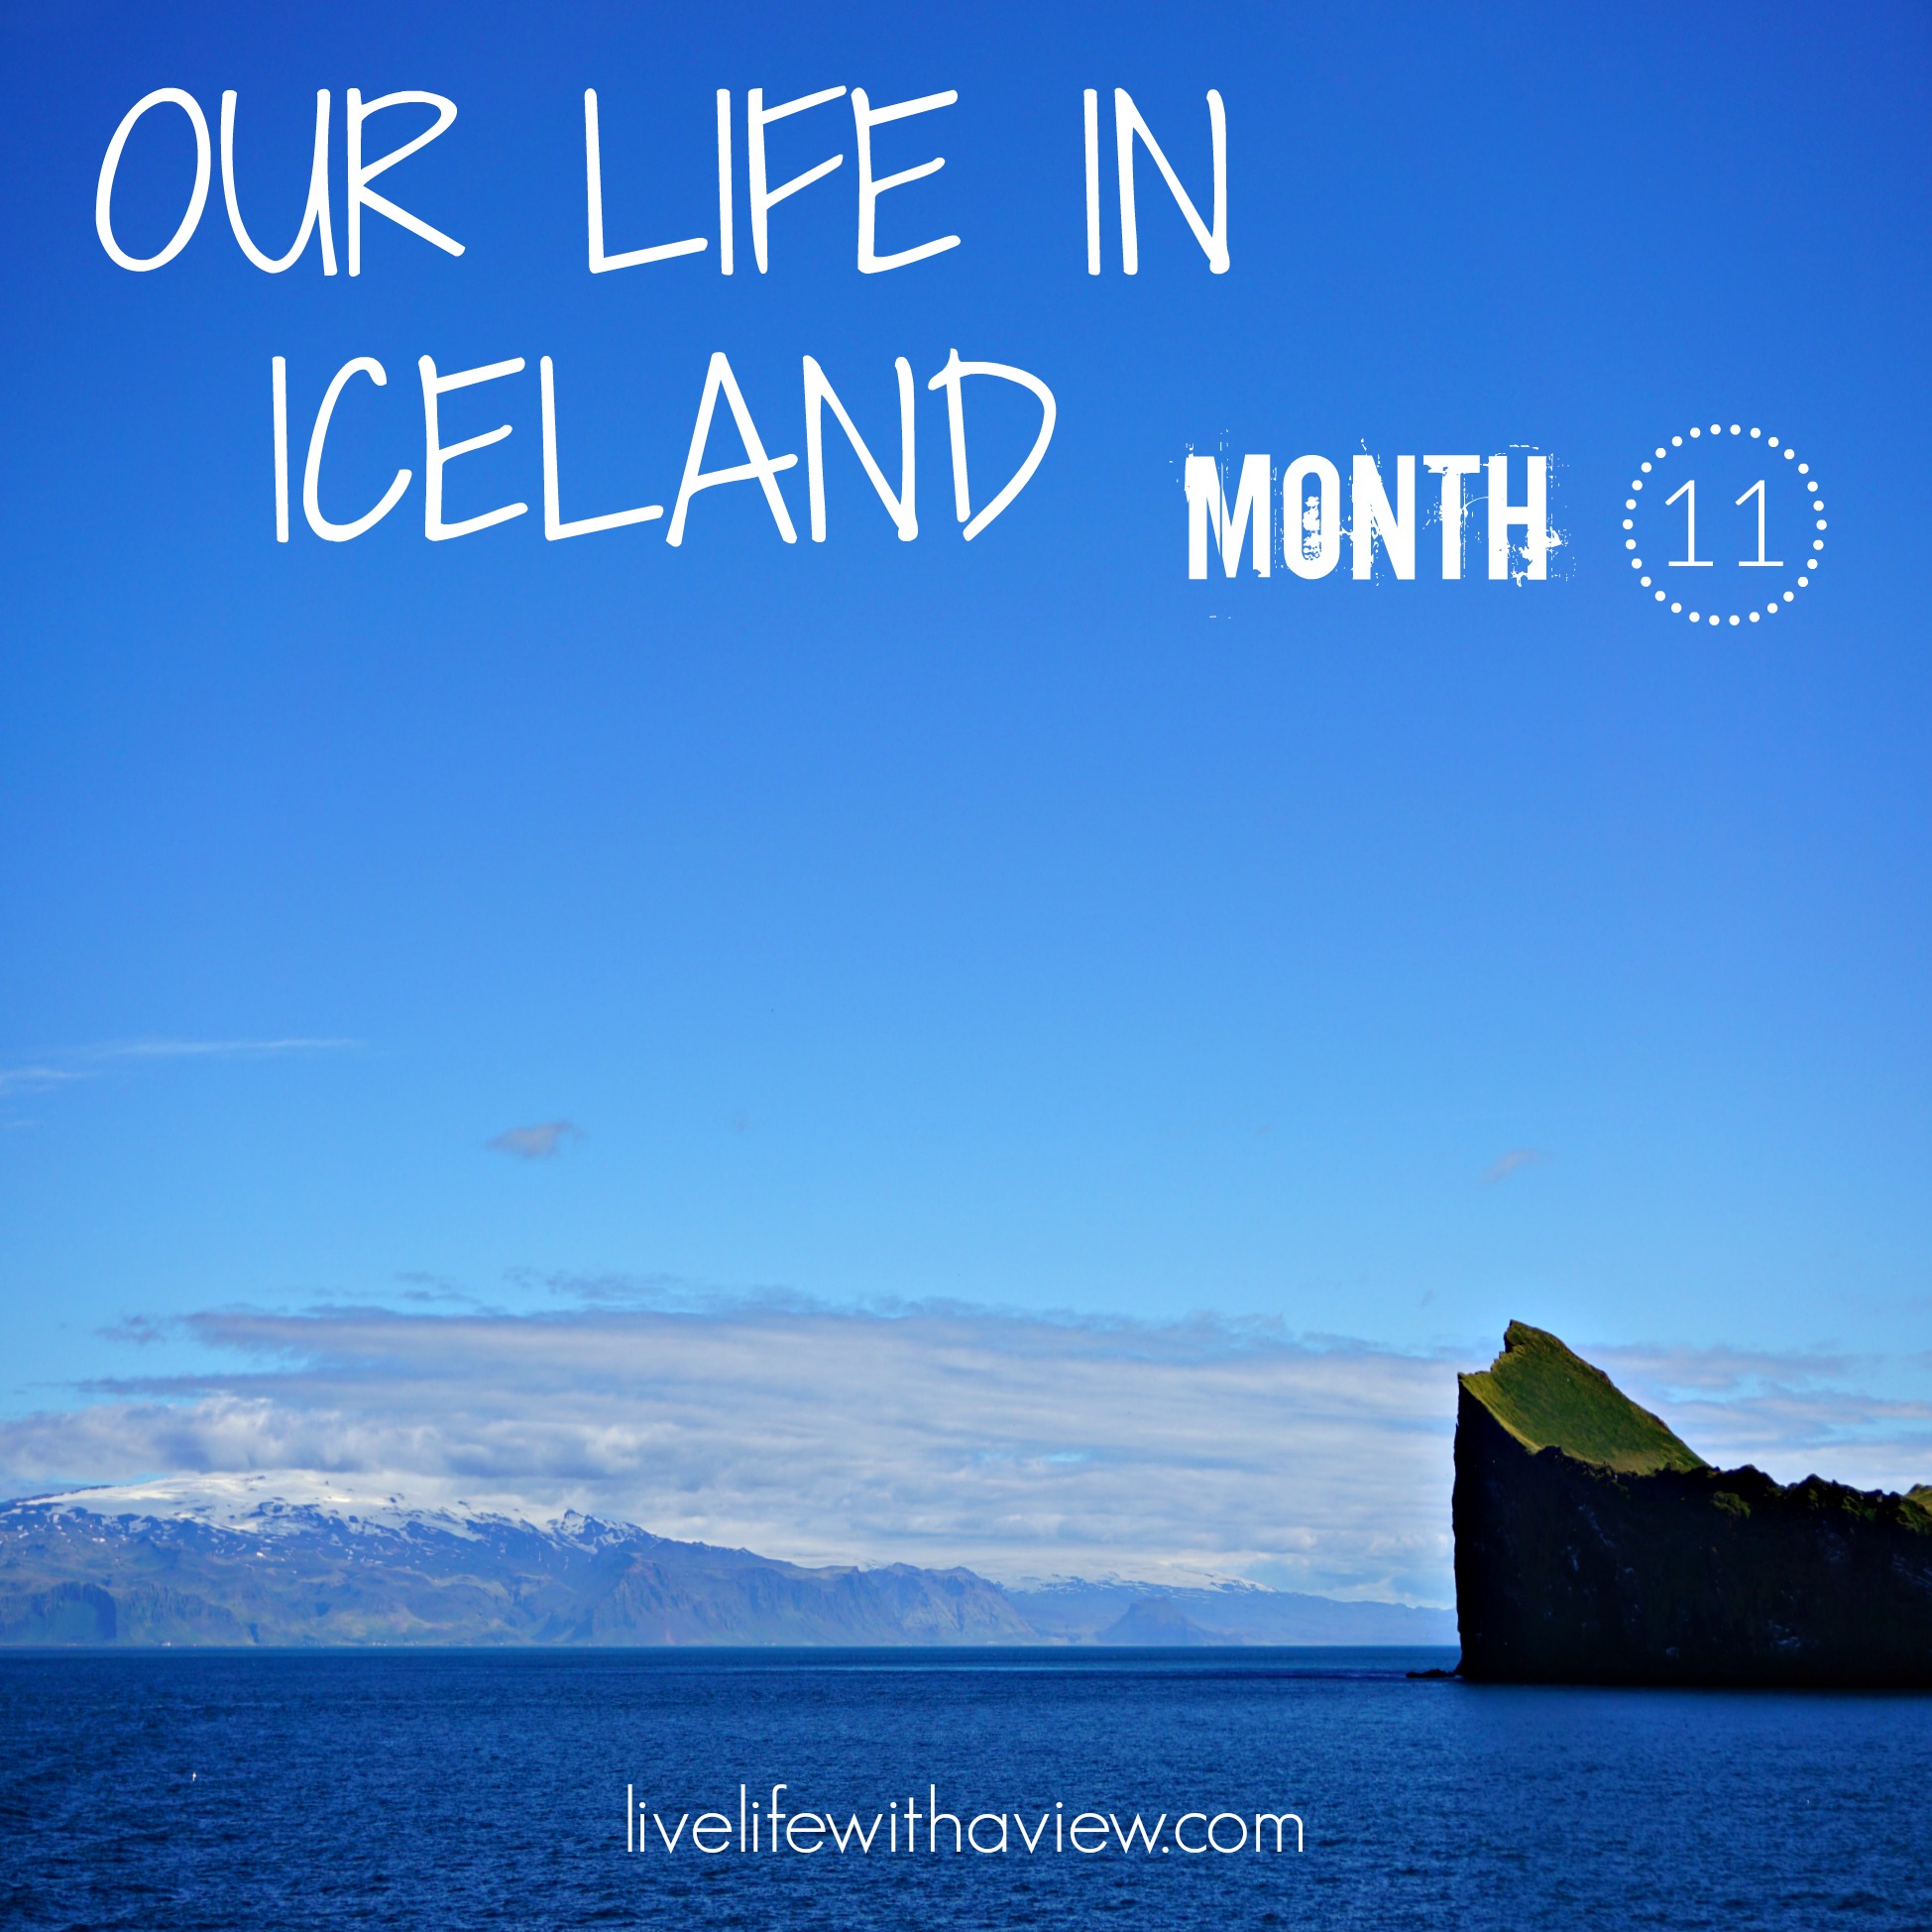 Our Life in Iceland - Month 11 | Life With a View